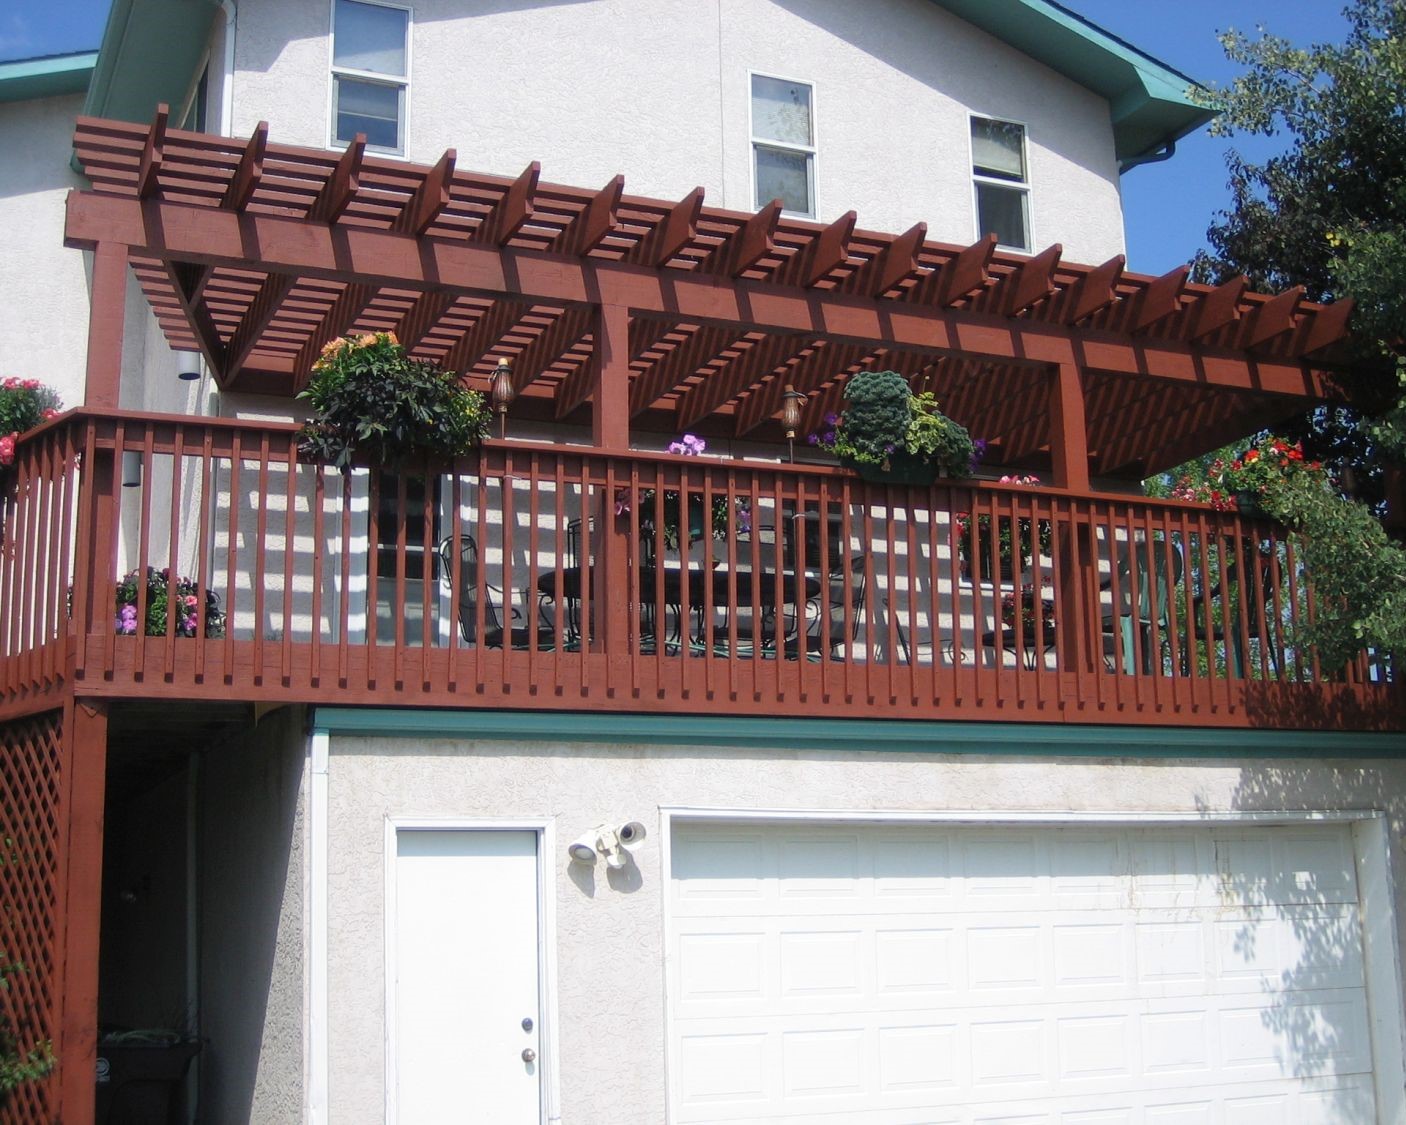 A redwood deck and pergola are built above the home's garage.